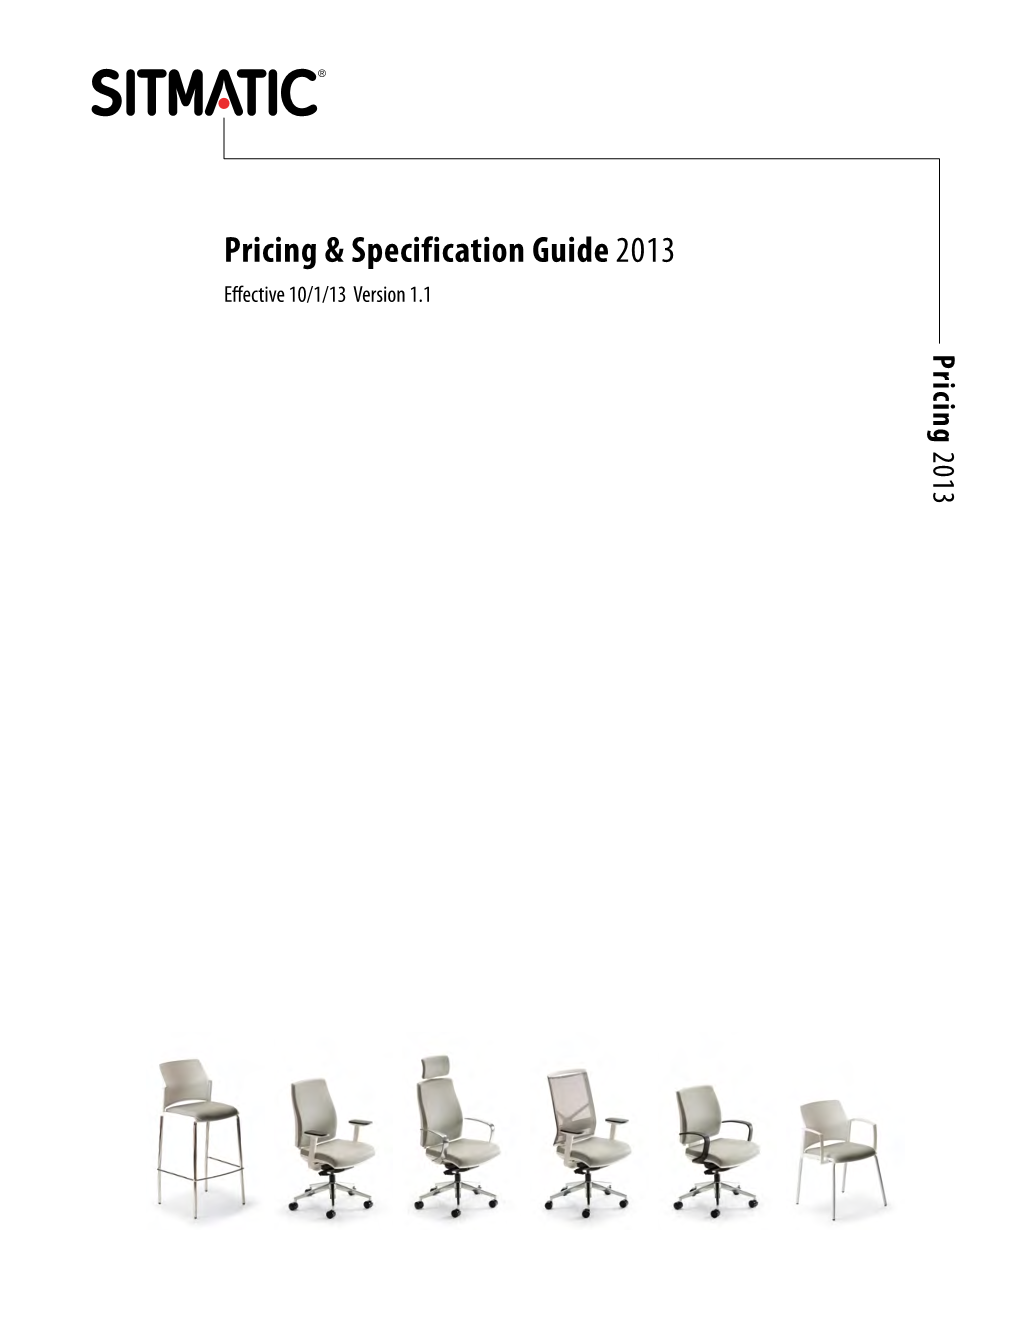 Sitmatic Pricing & Specification Guide 2013